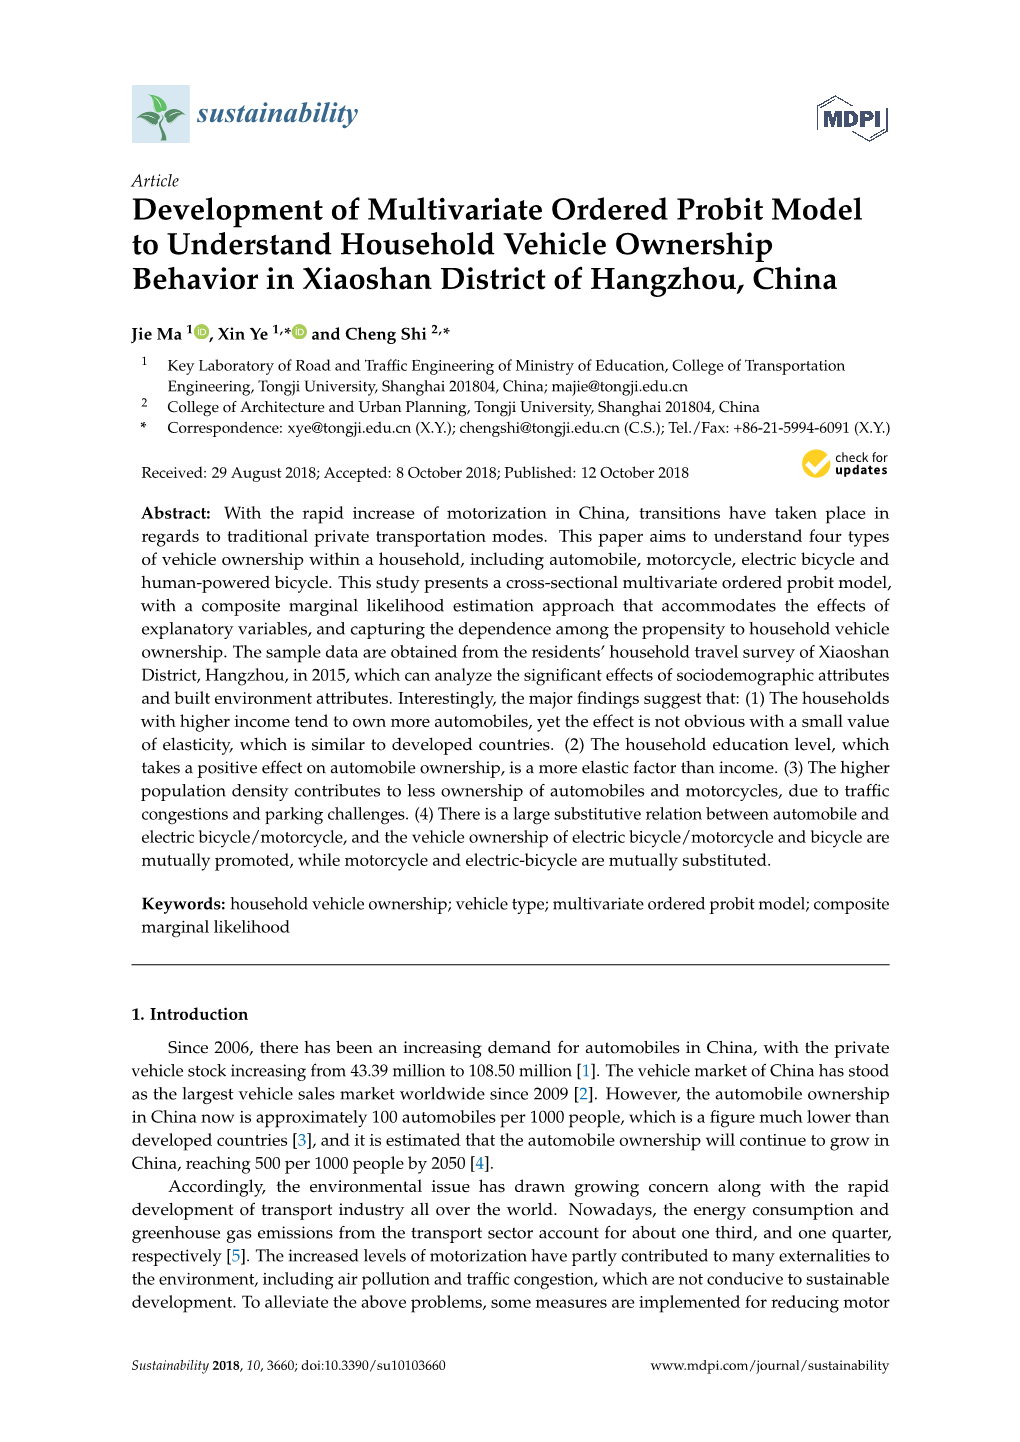 Development of Multivariate Ordered Probit Model to Understand Household Vehicle Ownership Behavior in Xiaoshan District of Hangzhou, China